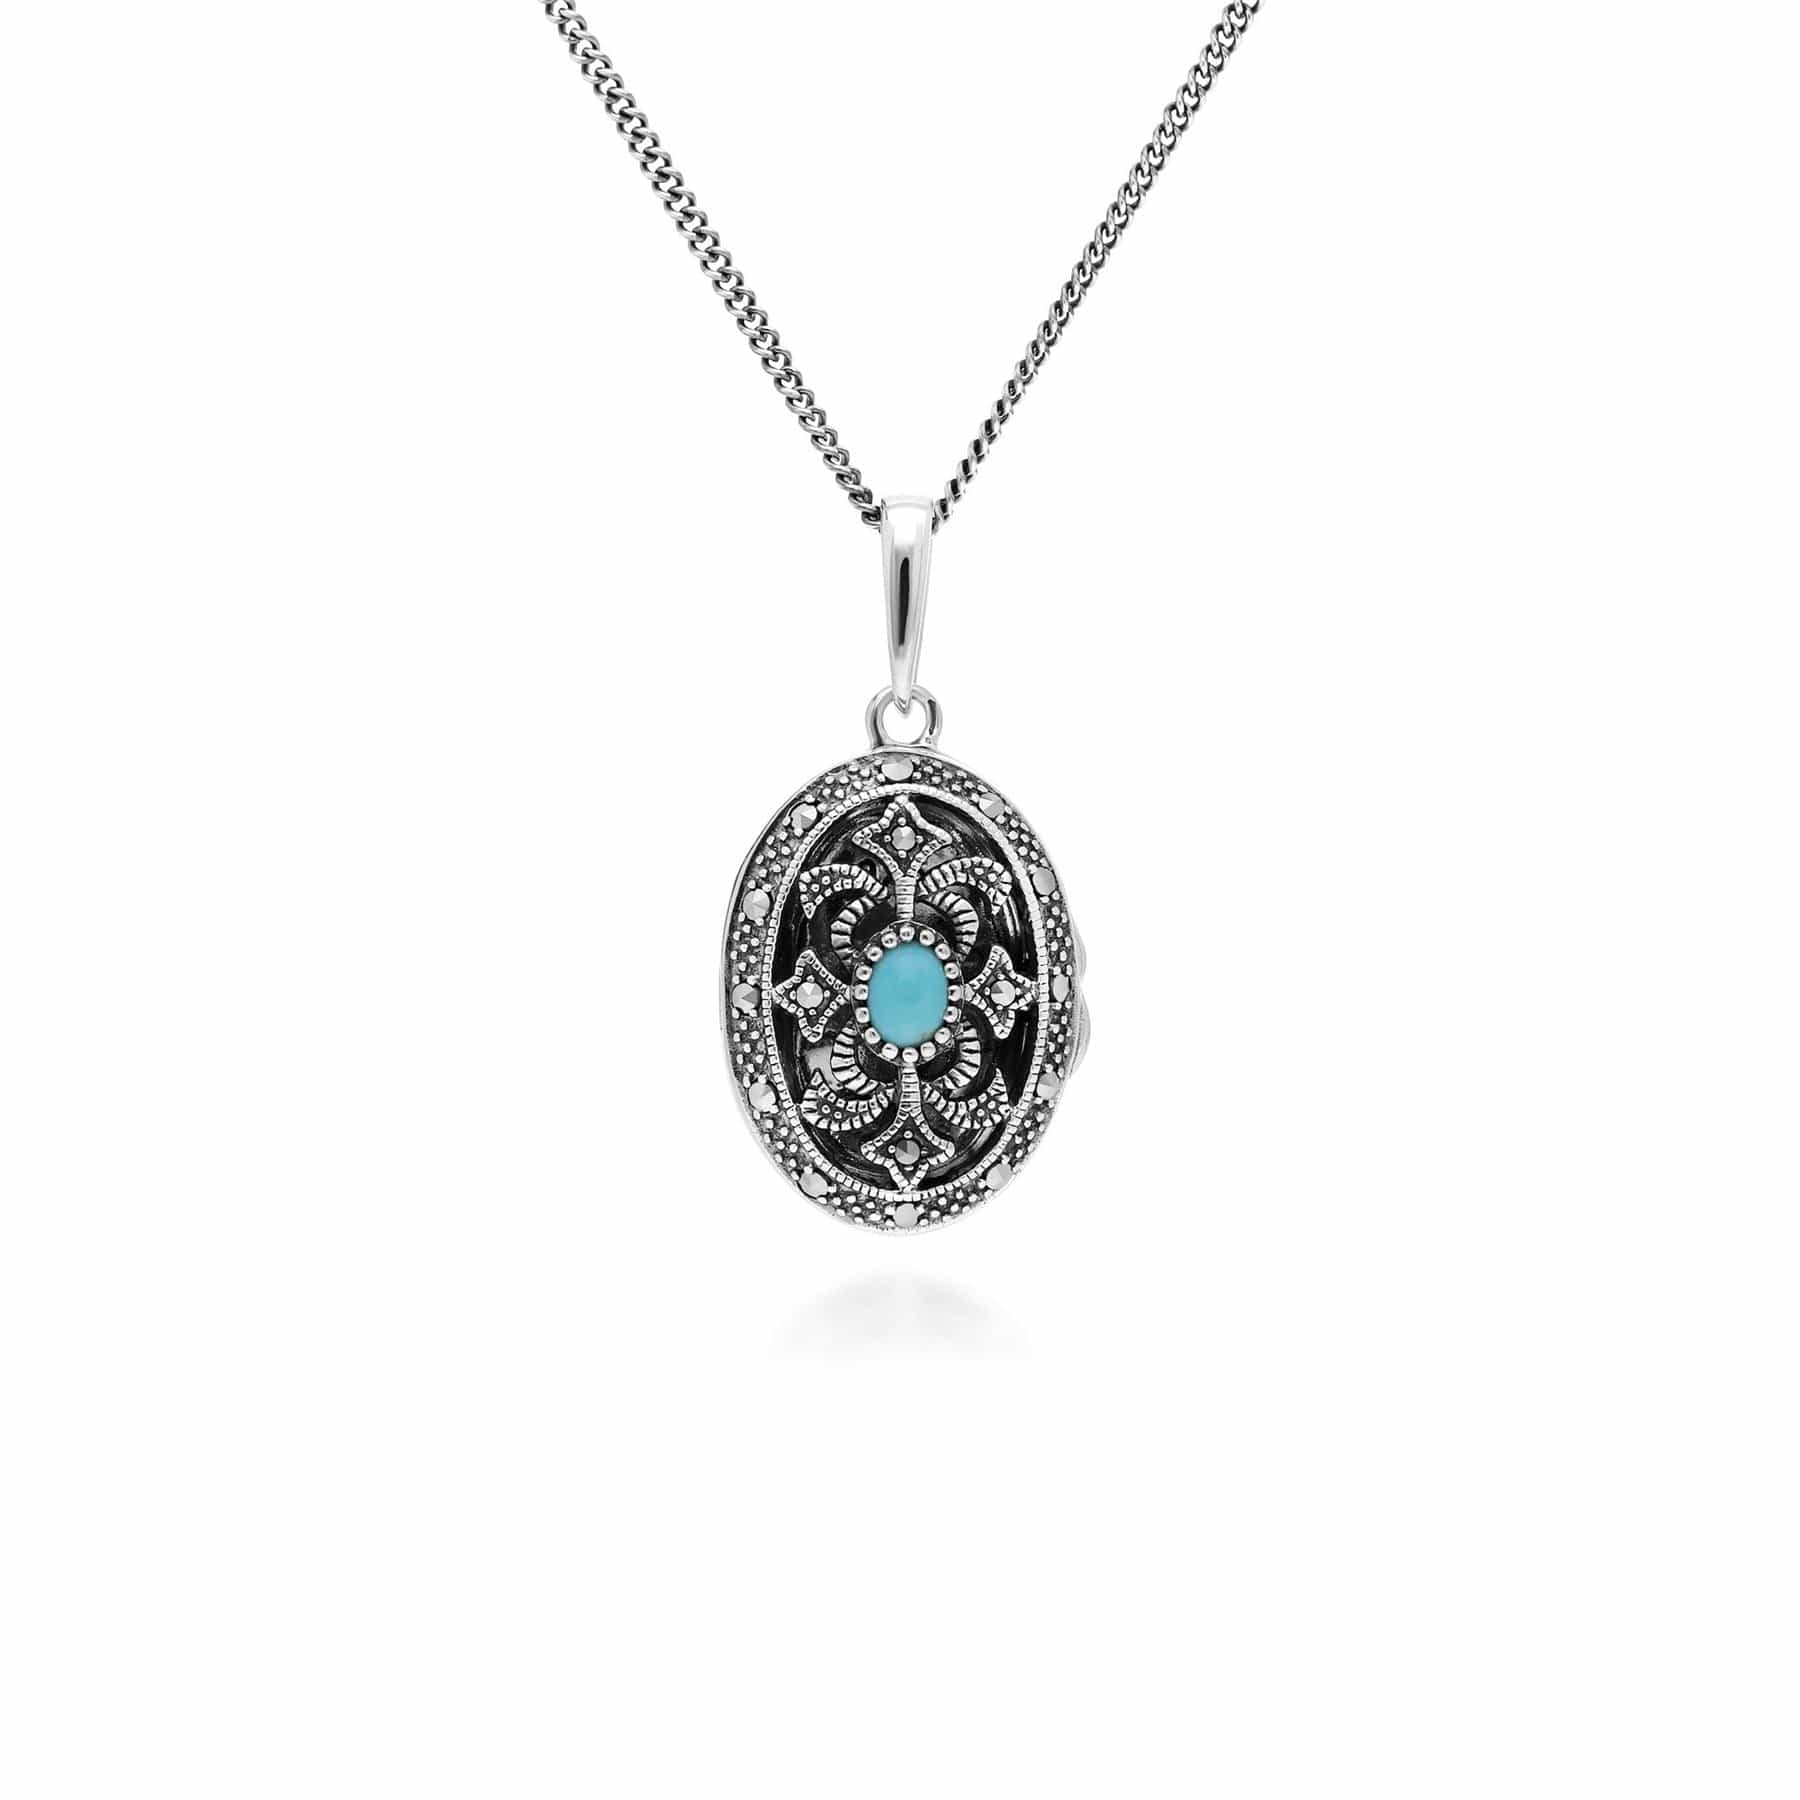 214N716213925 Art Nouveau Style Oval Turquoise & Marcasite Locket Necklace in 925 Sterling Silver 1